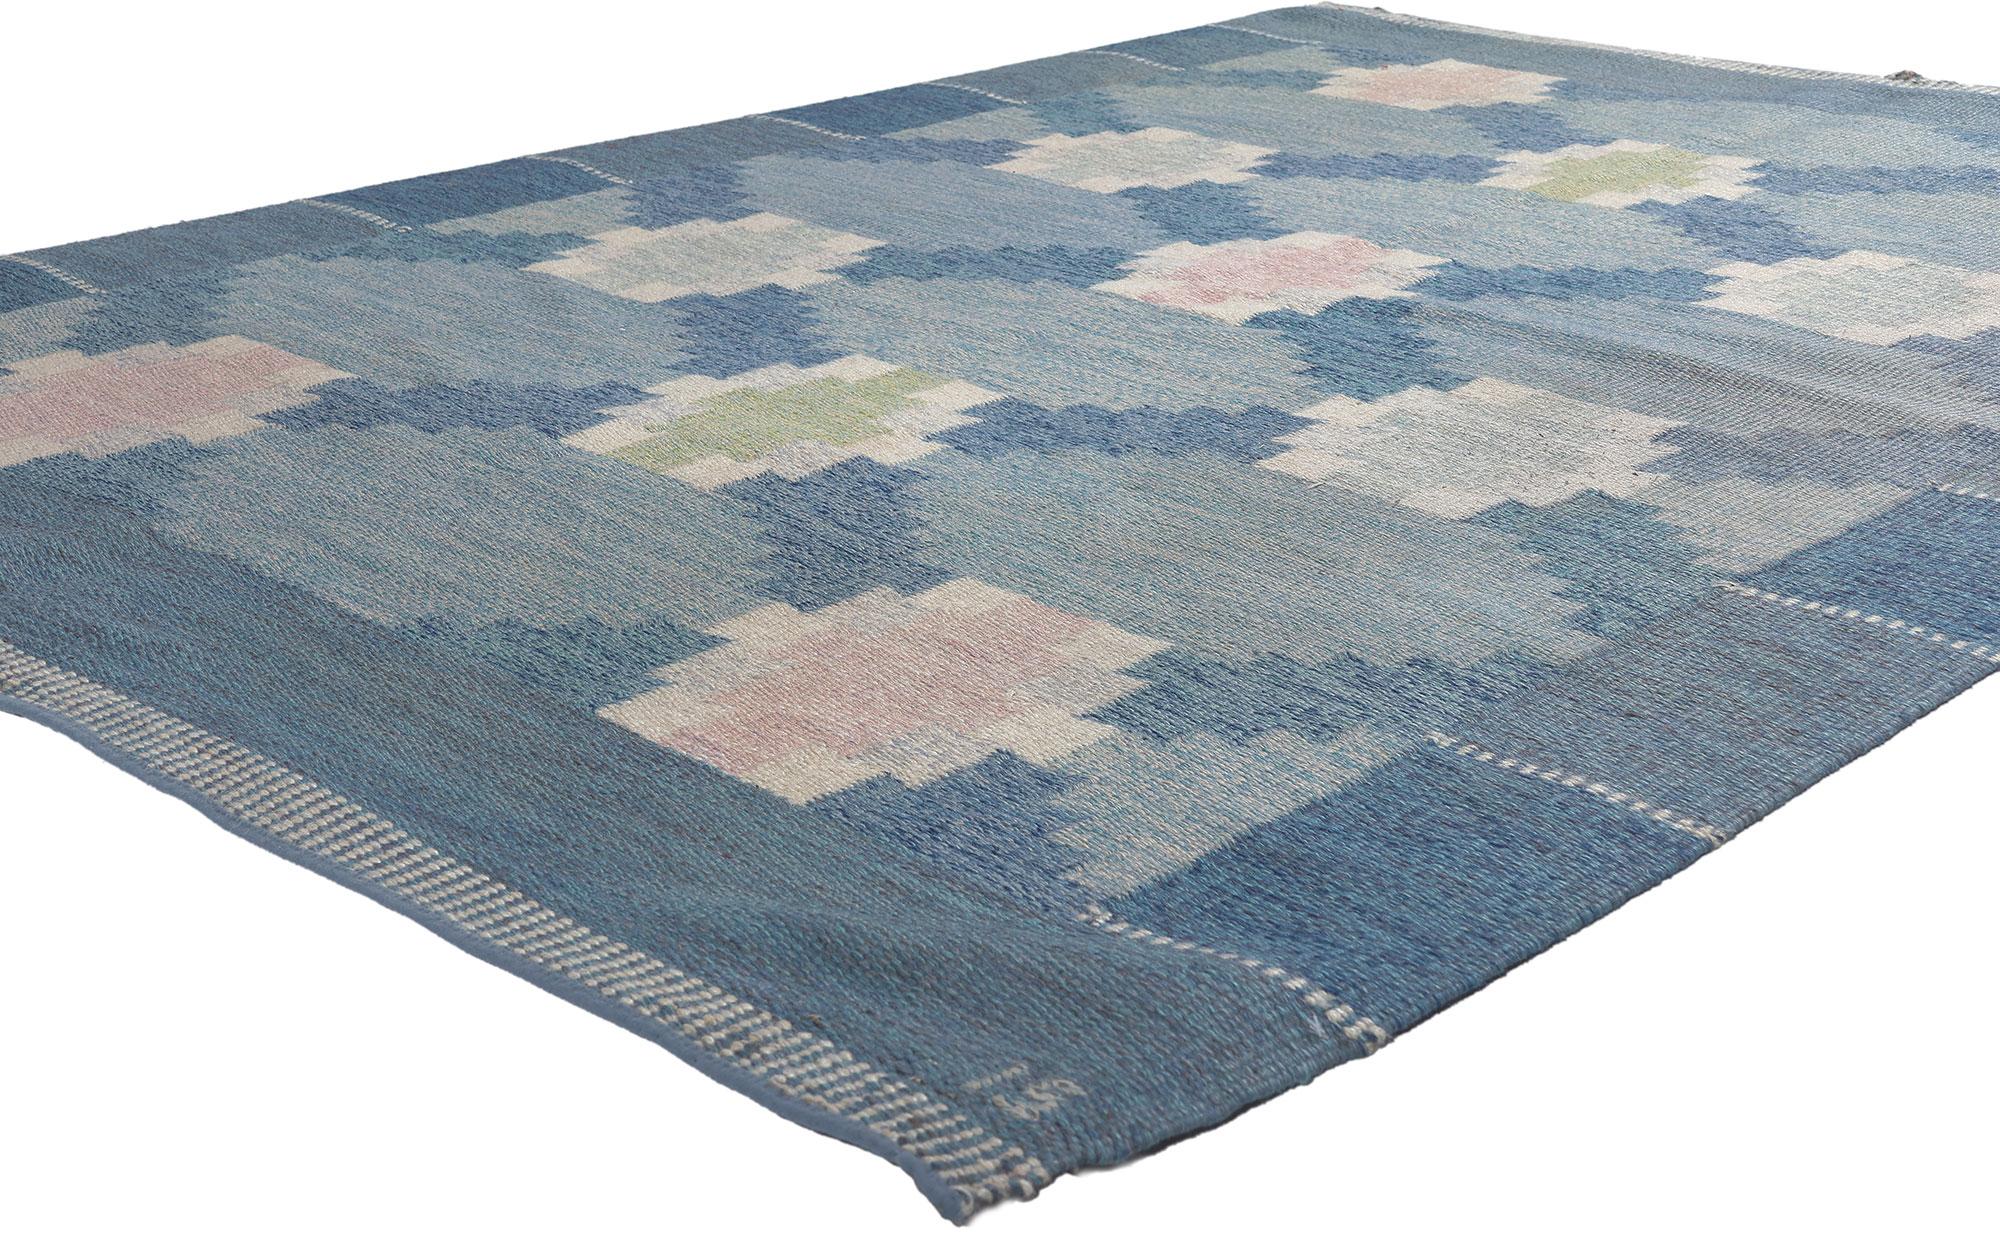 78499 Vintage Swedish Kilim Rollakan Rug, 05'04 x 07'07. Emanating Scandinavian Modern style with incredible detail and texture, this handwoven Swedish rollakan rug is a captivating vision of woven beauty. The eye-catching geometric pattern and